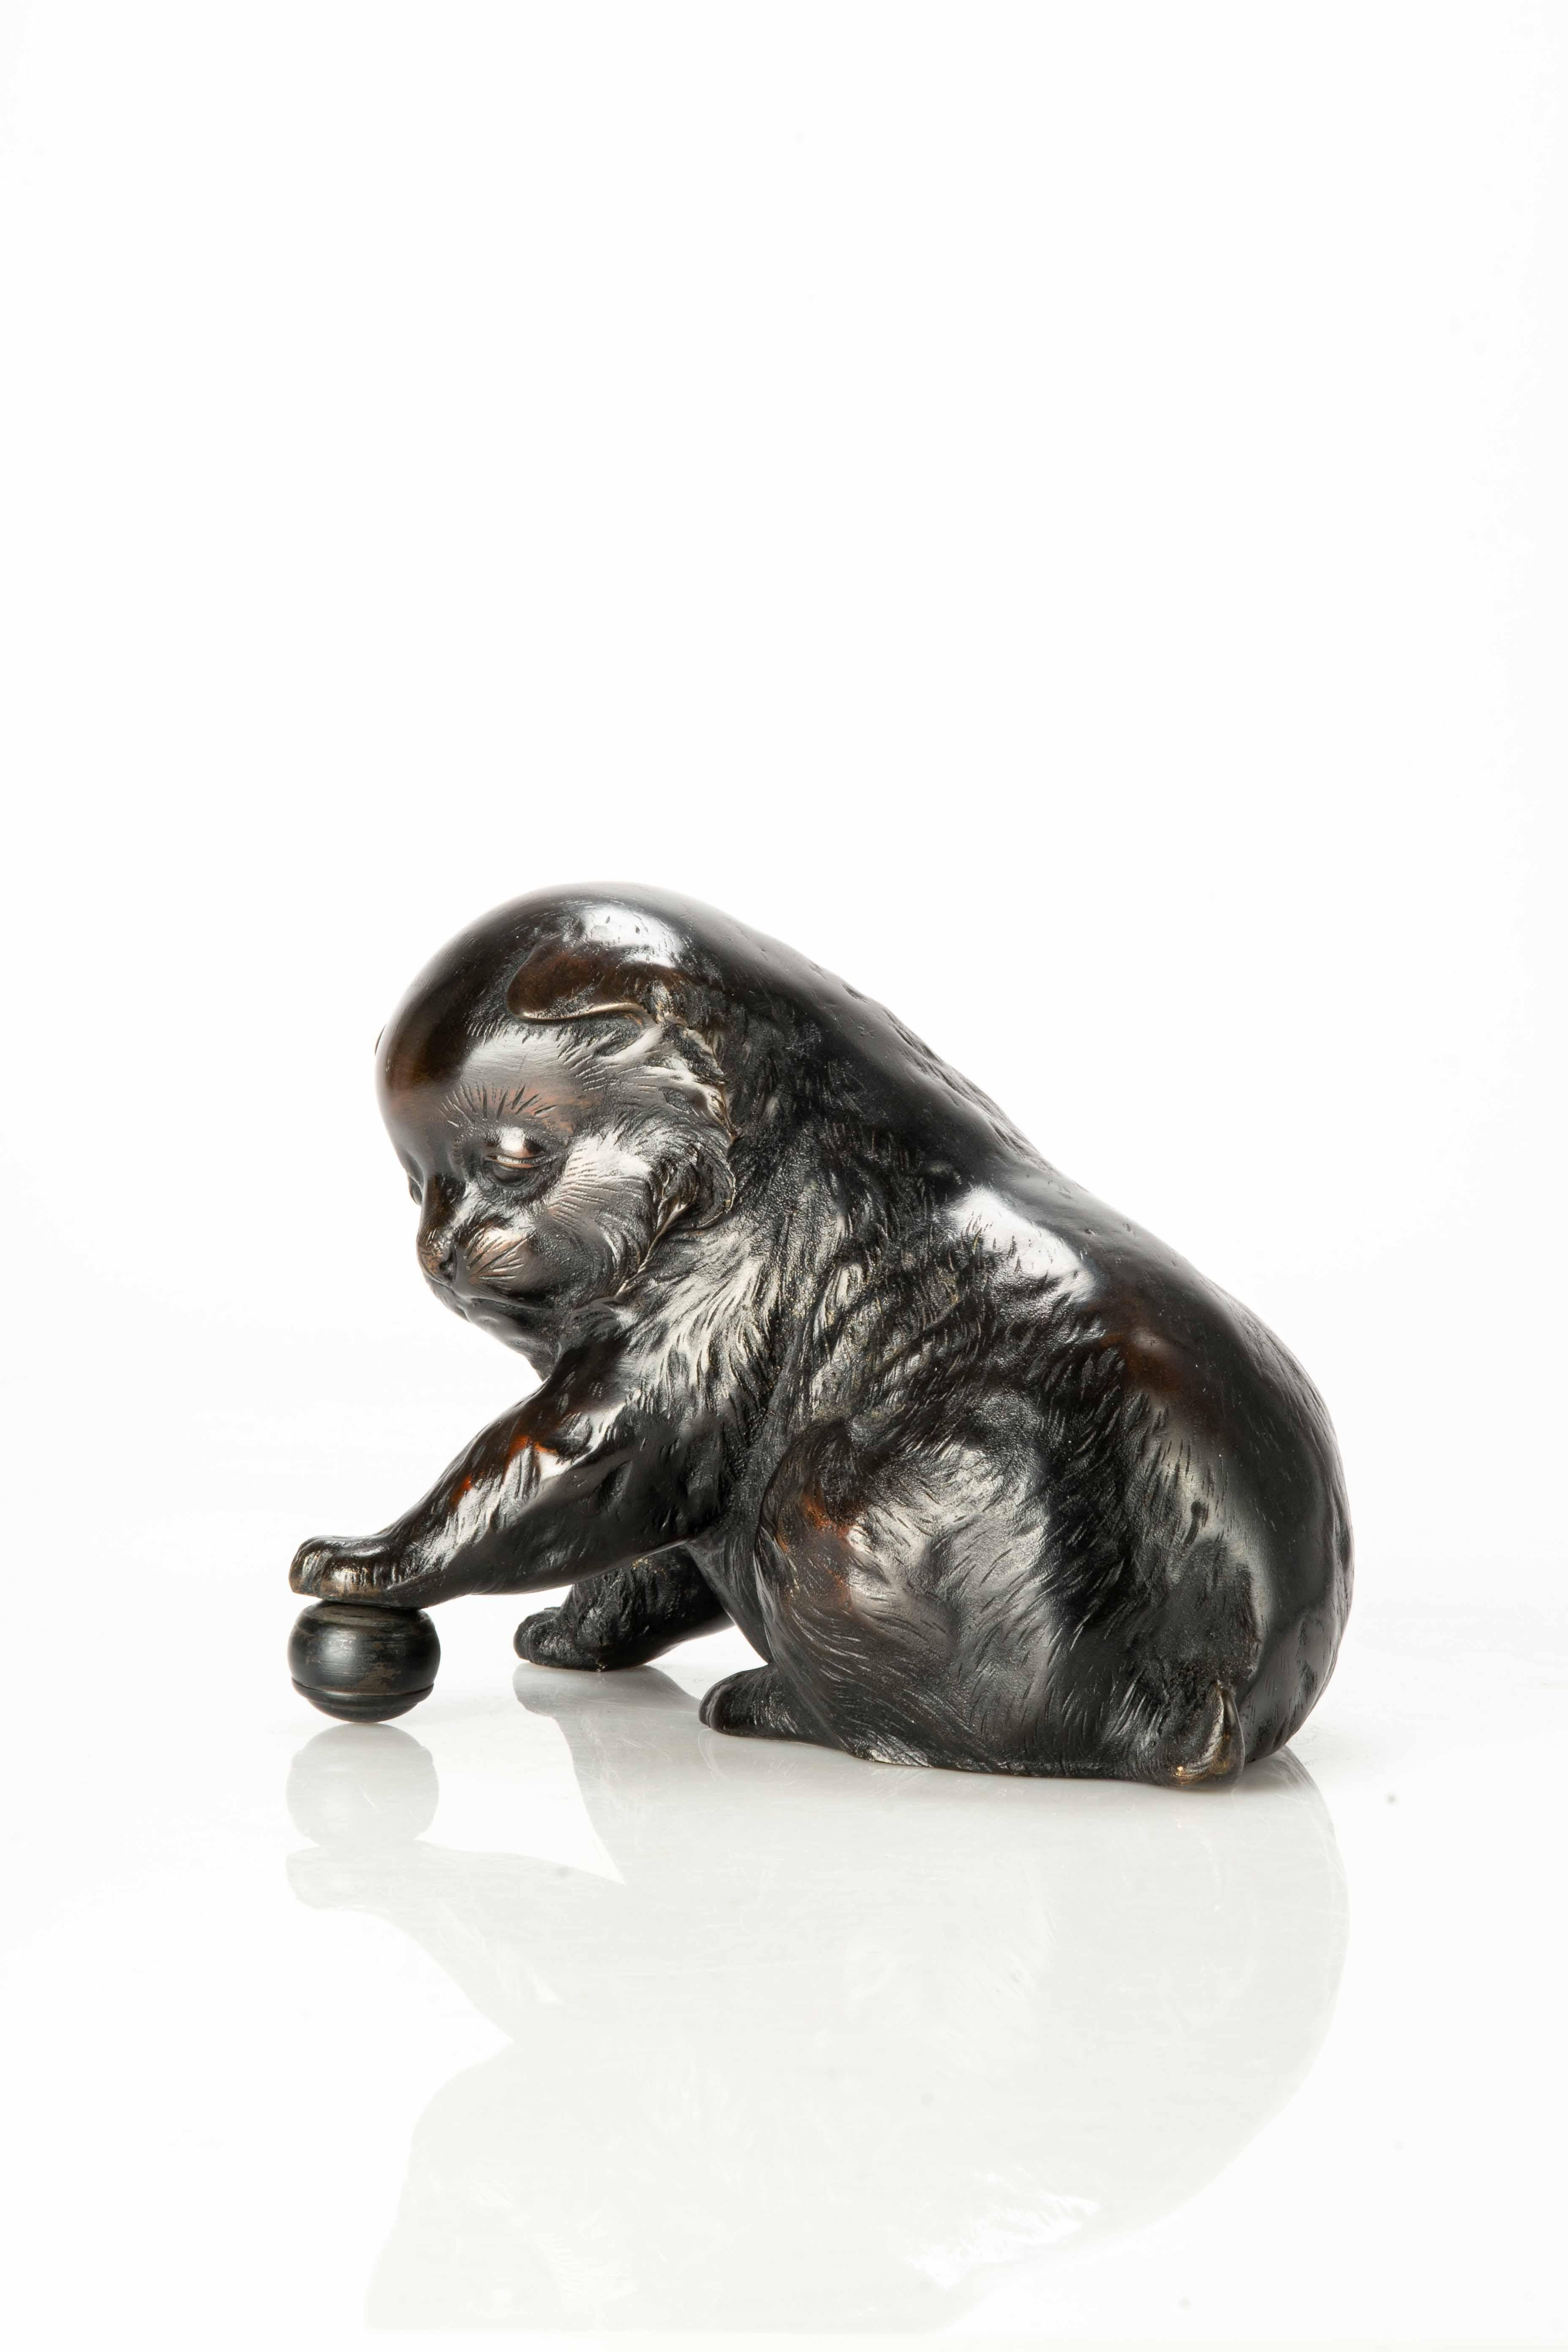 Bronze okimono depicting a study of a puppy playing with a ball.

The puppy has a playful and curious expression as he interacts with the ball.

The ball the dog plays with is also sculpted with lifelike detail, the patina of the bronze surface